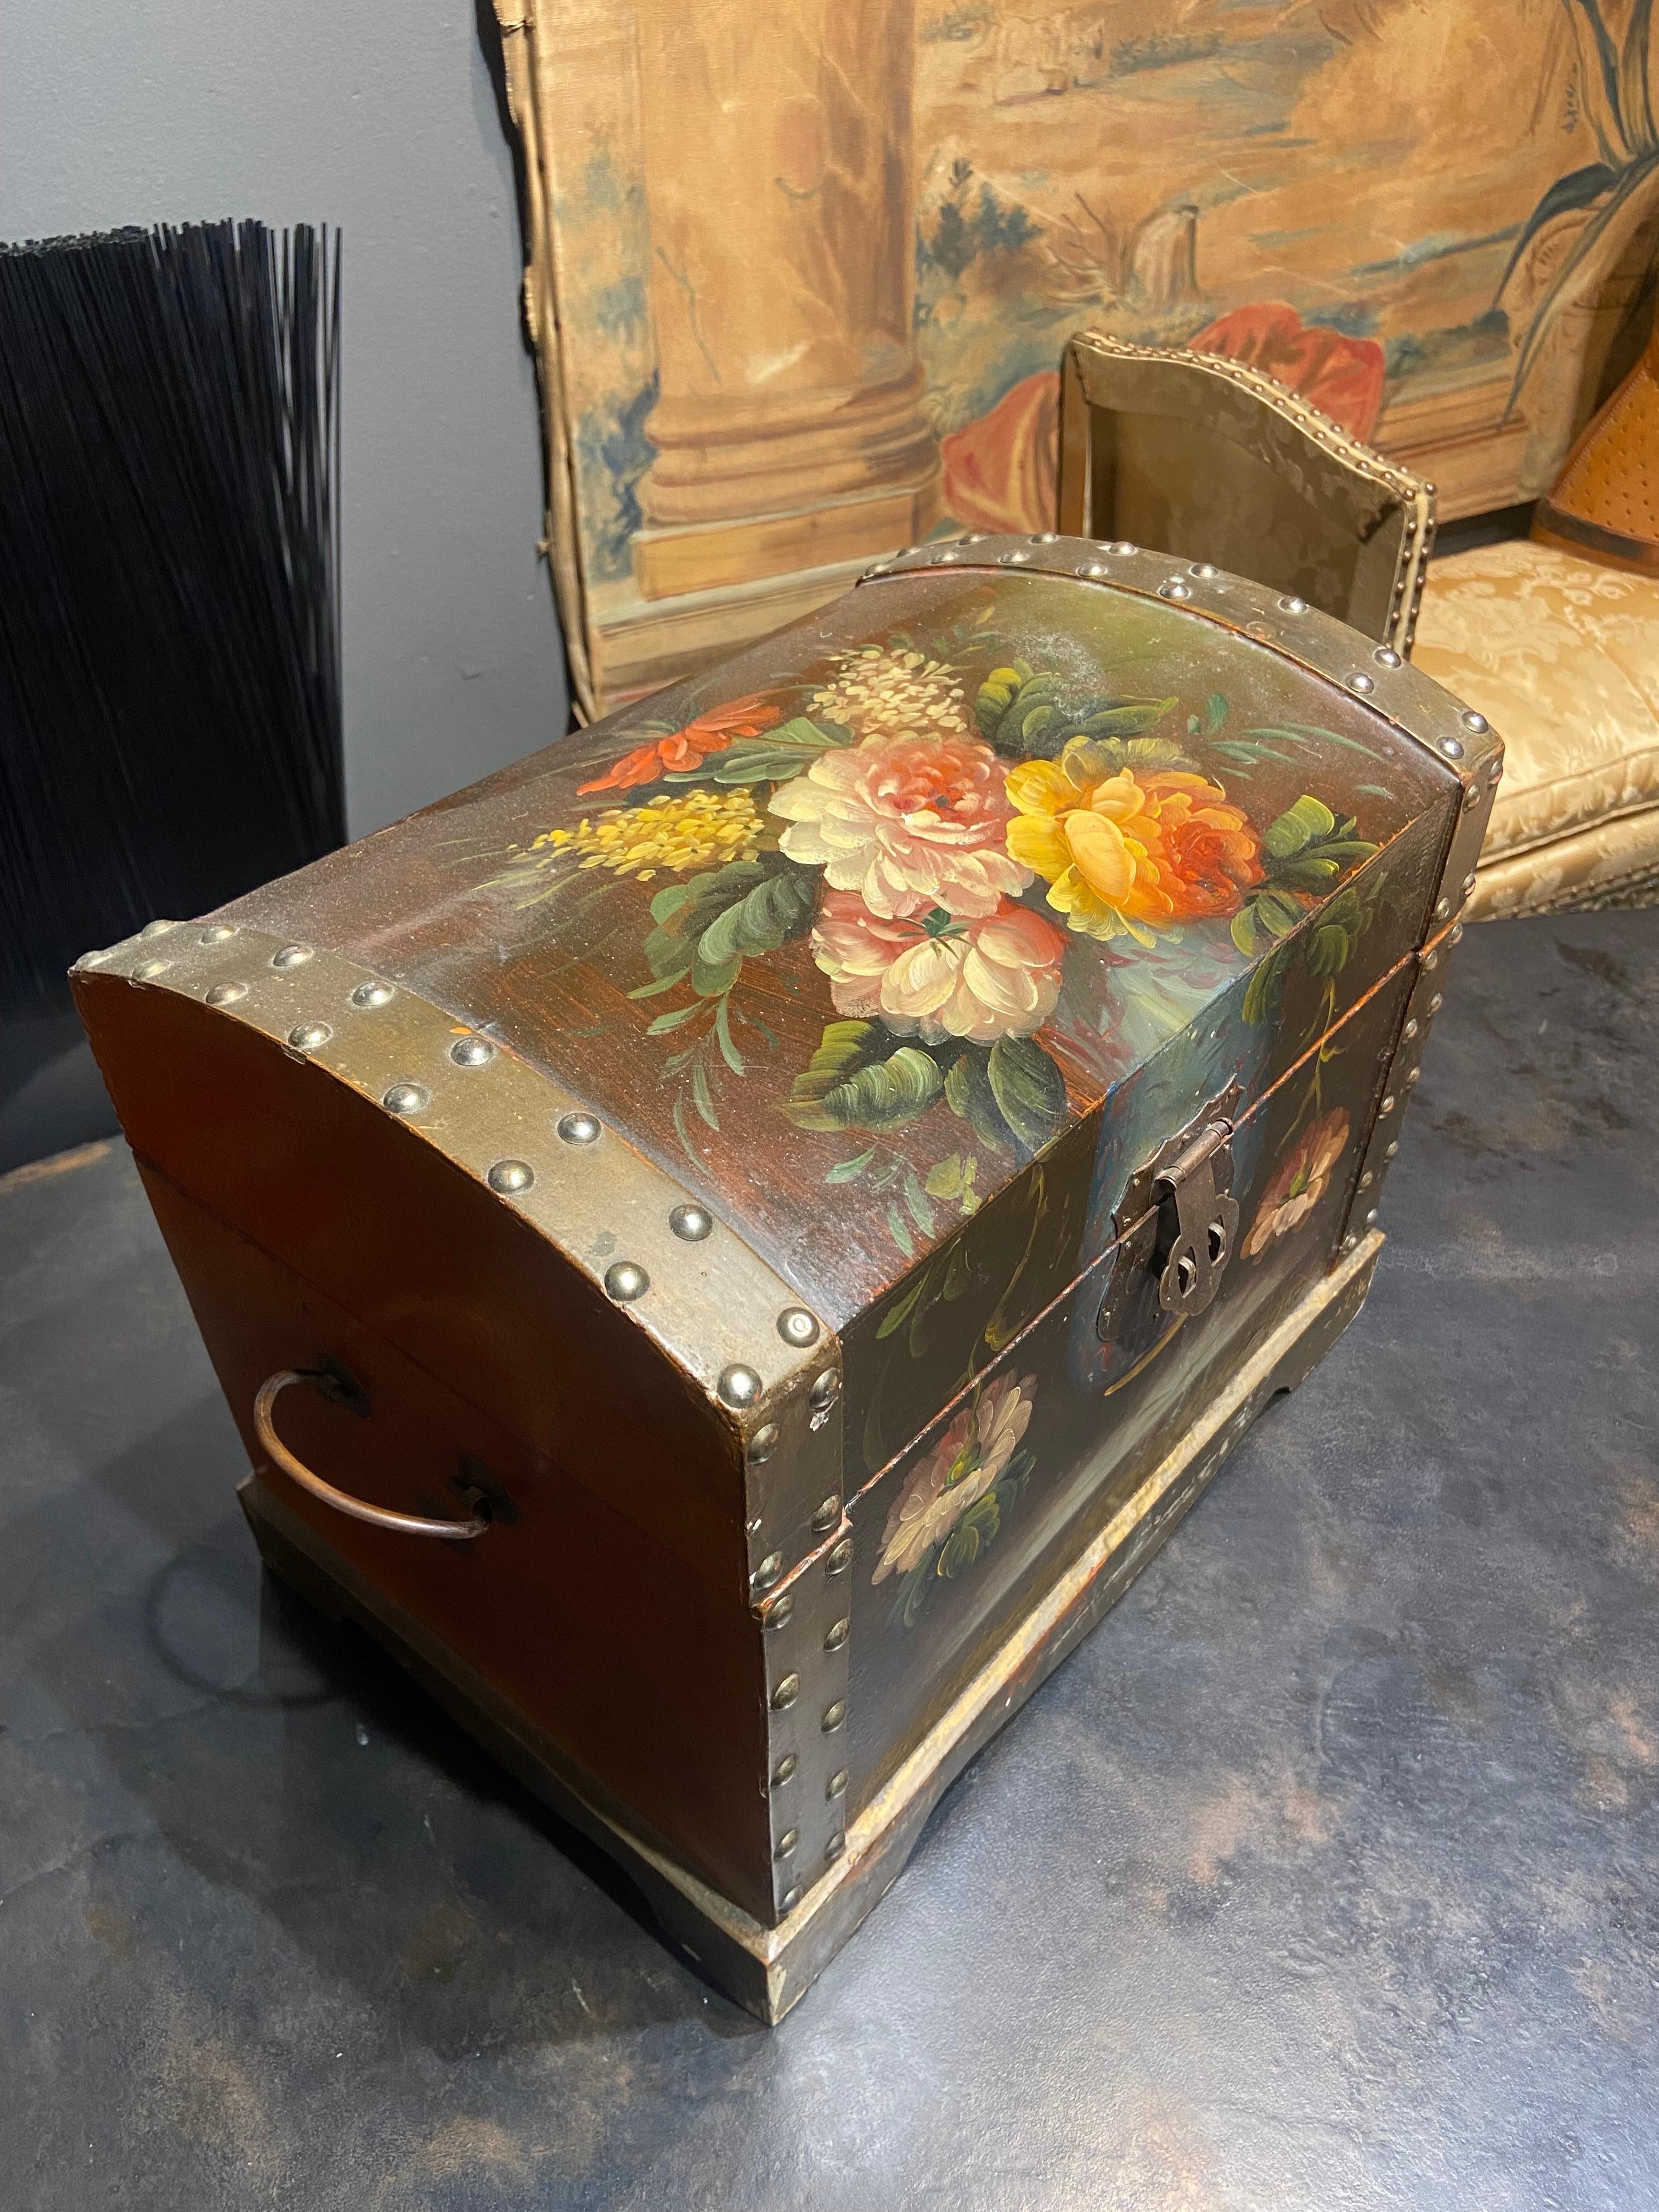 Beautiful hand painted wooden box decorated in very romantic style with lovely flowers on the top and front side. The edges of the box are made of metal and there are metal handles at the sides. The inside of the piece is painted in black. 
France,